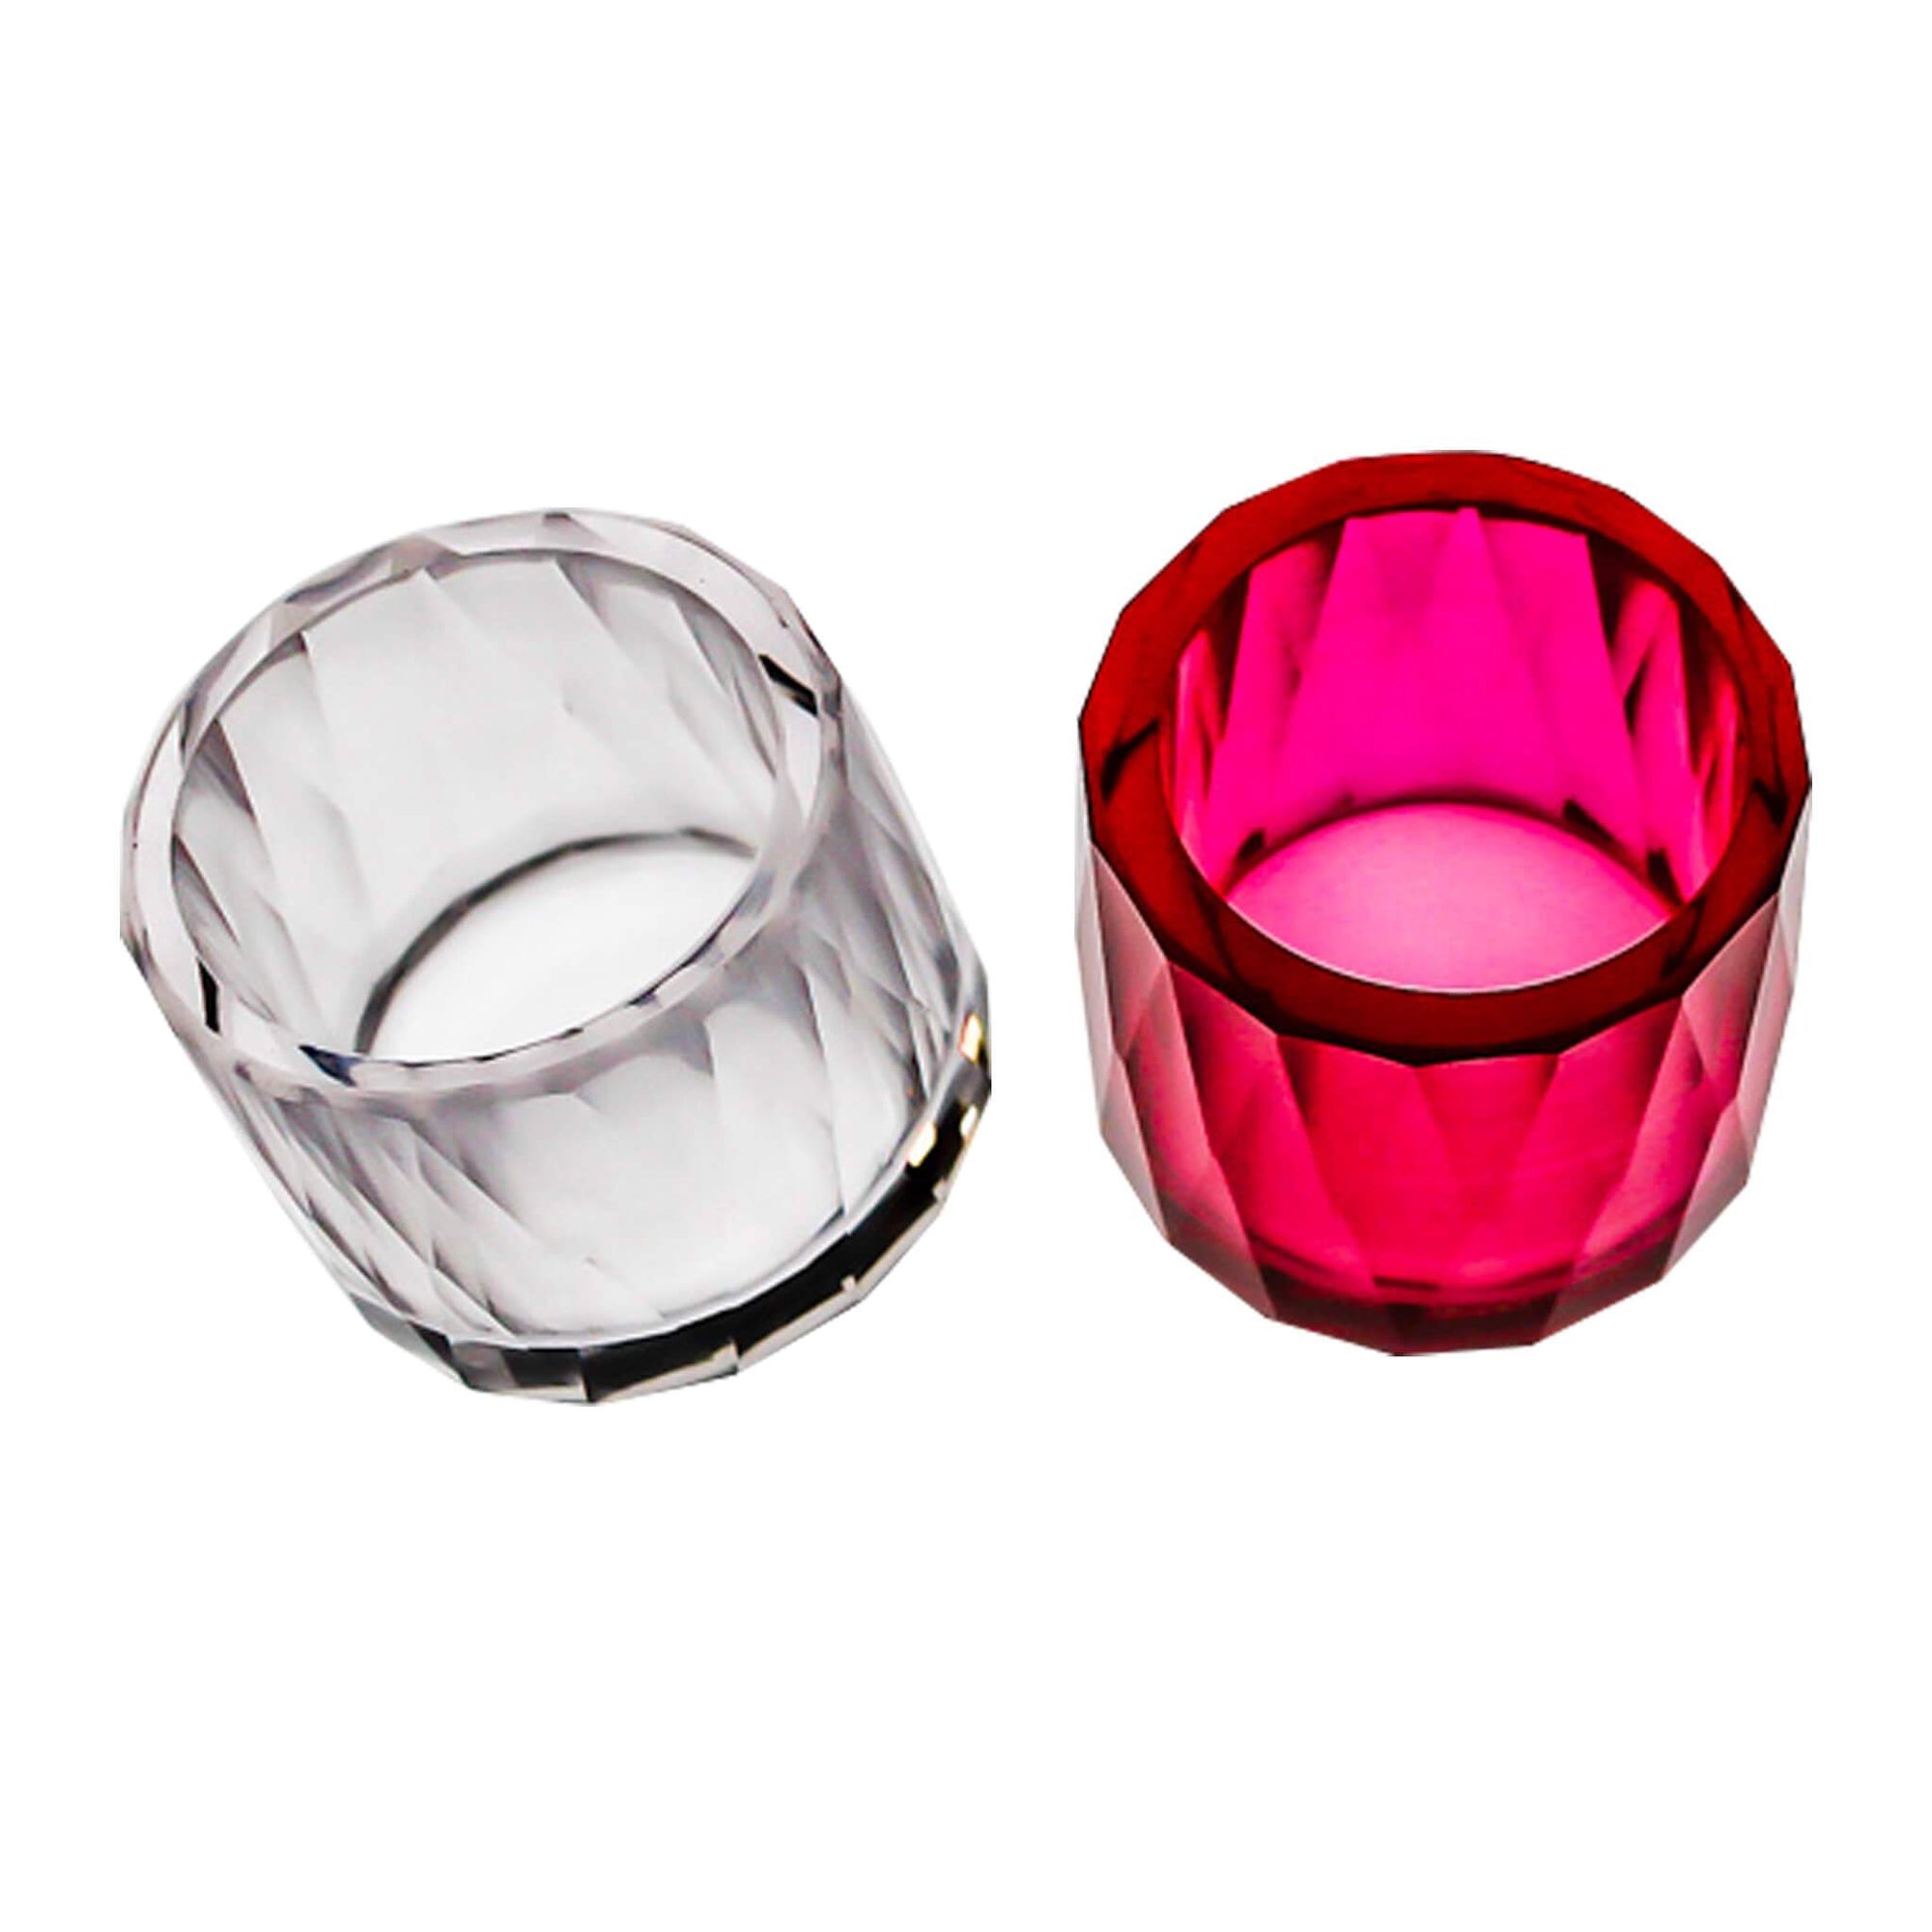 25mm Faceted Sapphire Insert Cup | Ruby & Sapphire View | the dabbing specialists